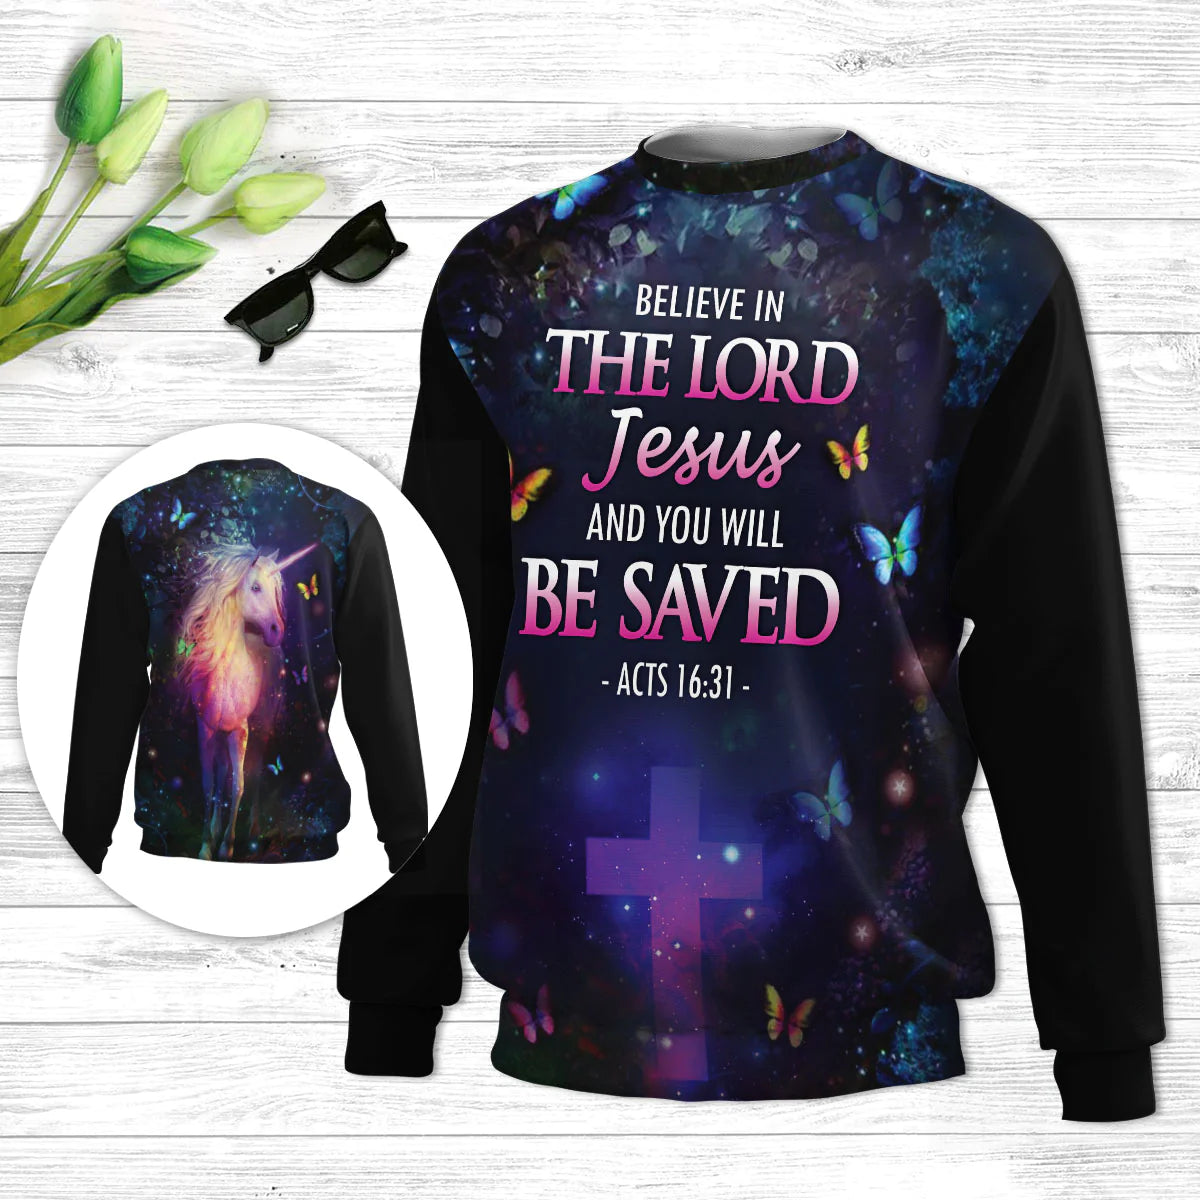 Believe In The Lord Jesus Unicorn & Cross Butrerfly Ugly Christmas Sweater - Christian Unisex Sweater - Religious Christmas Gift